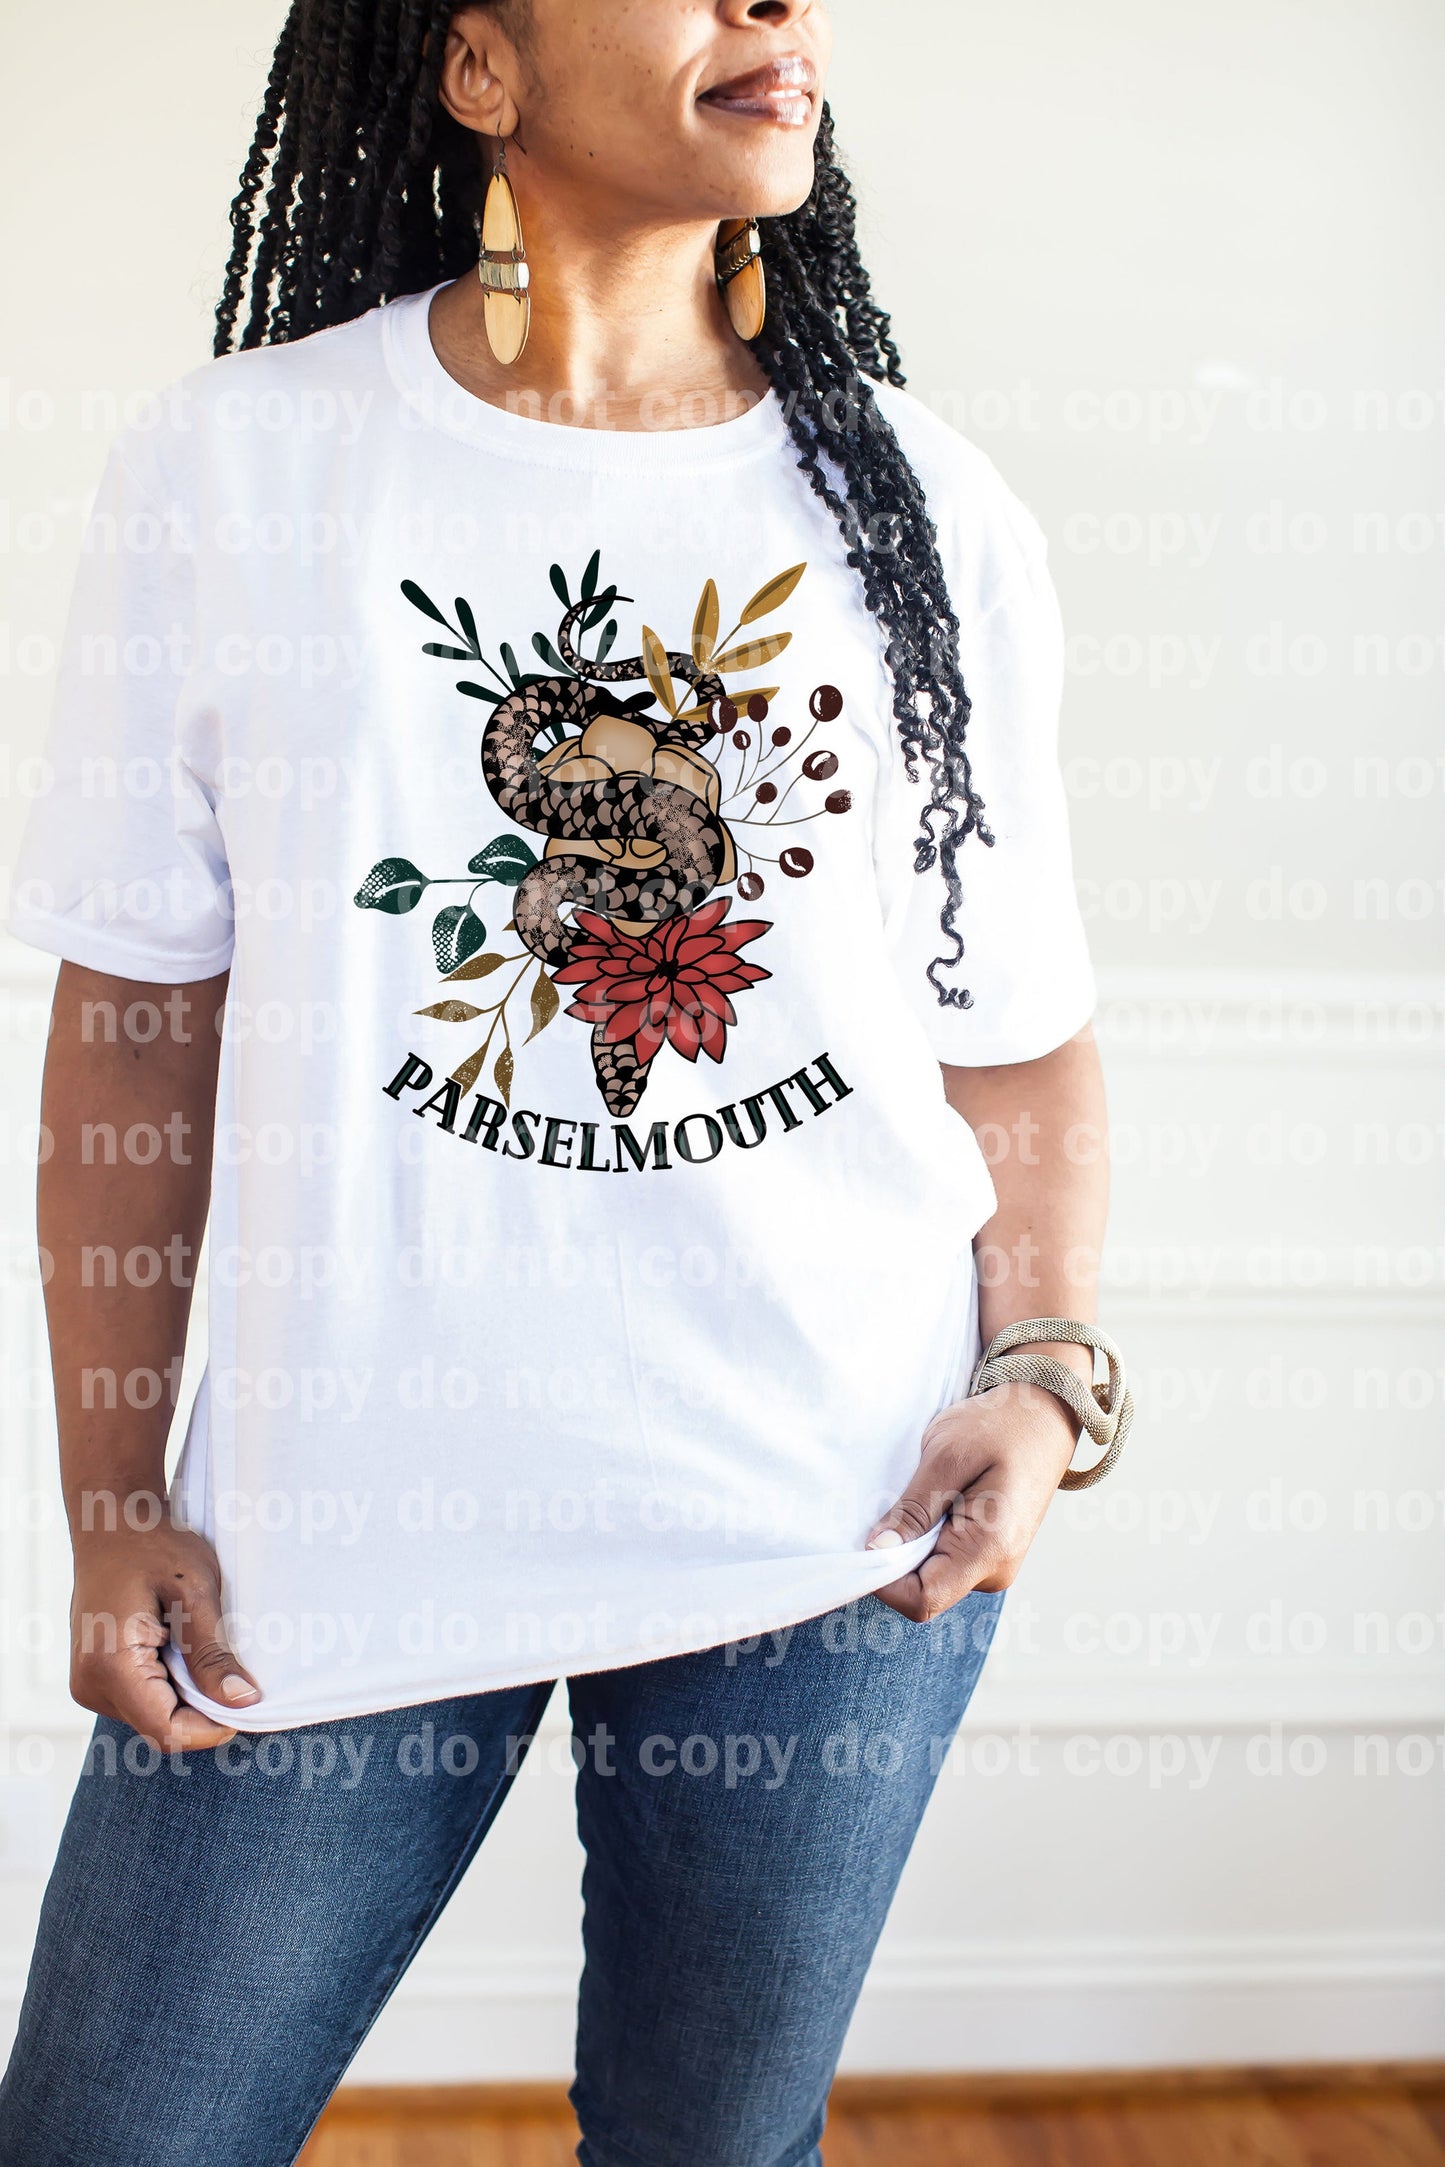 Parselmouth Typography Full Color/One Color Dream Print or Sublimation Print